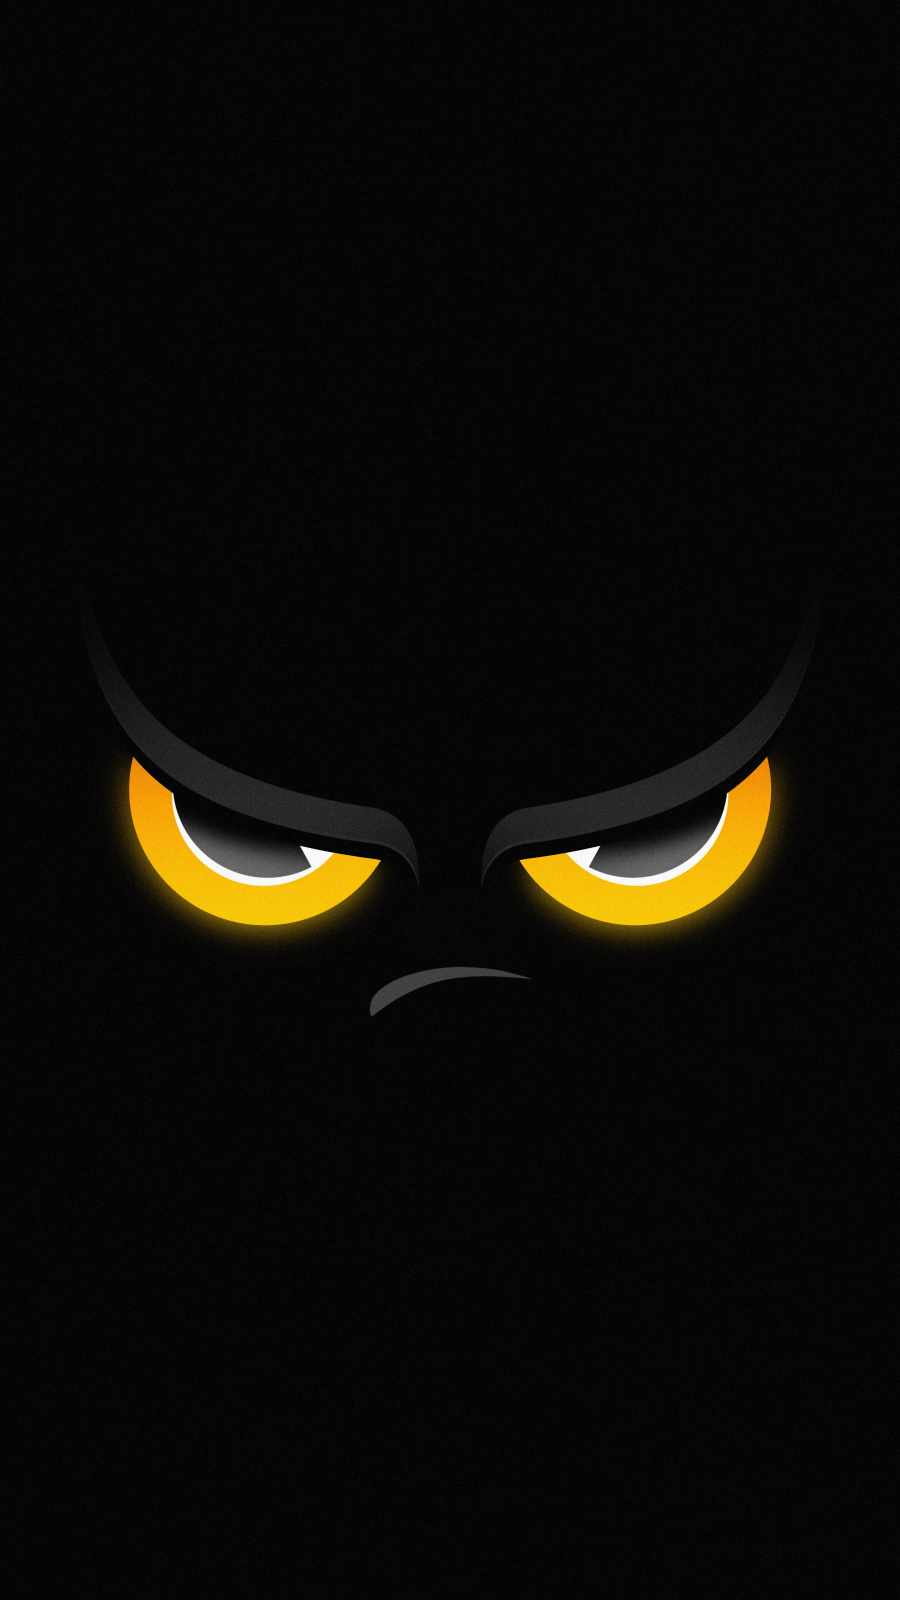 Angry Face IPhone Wallpaper HD - IPhone Wallpapers : iPhone Wallpapers